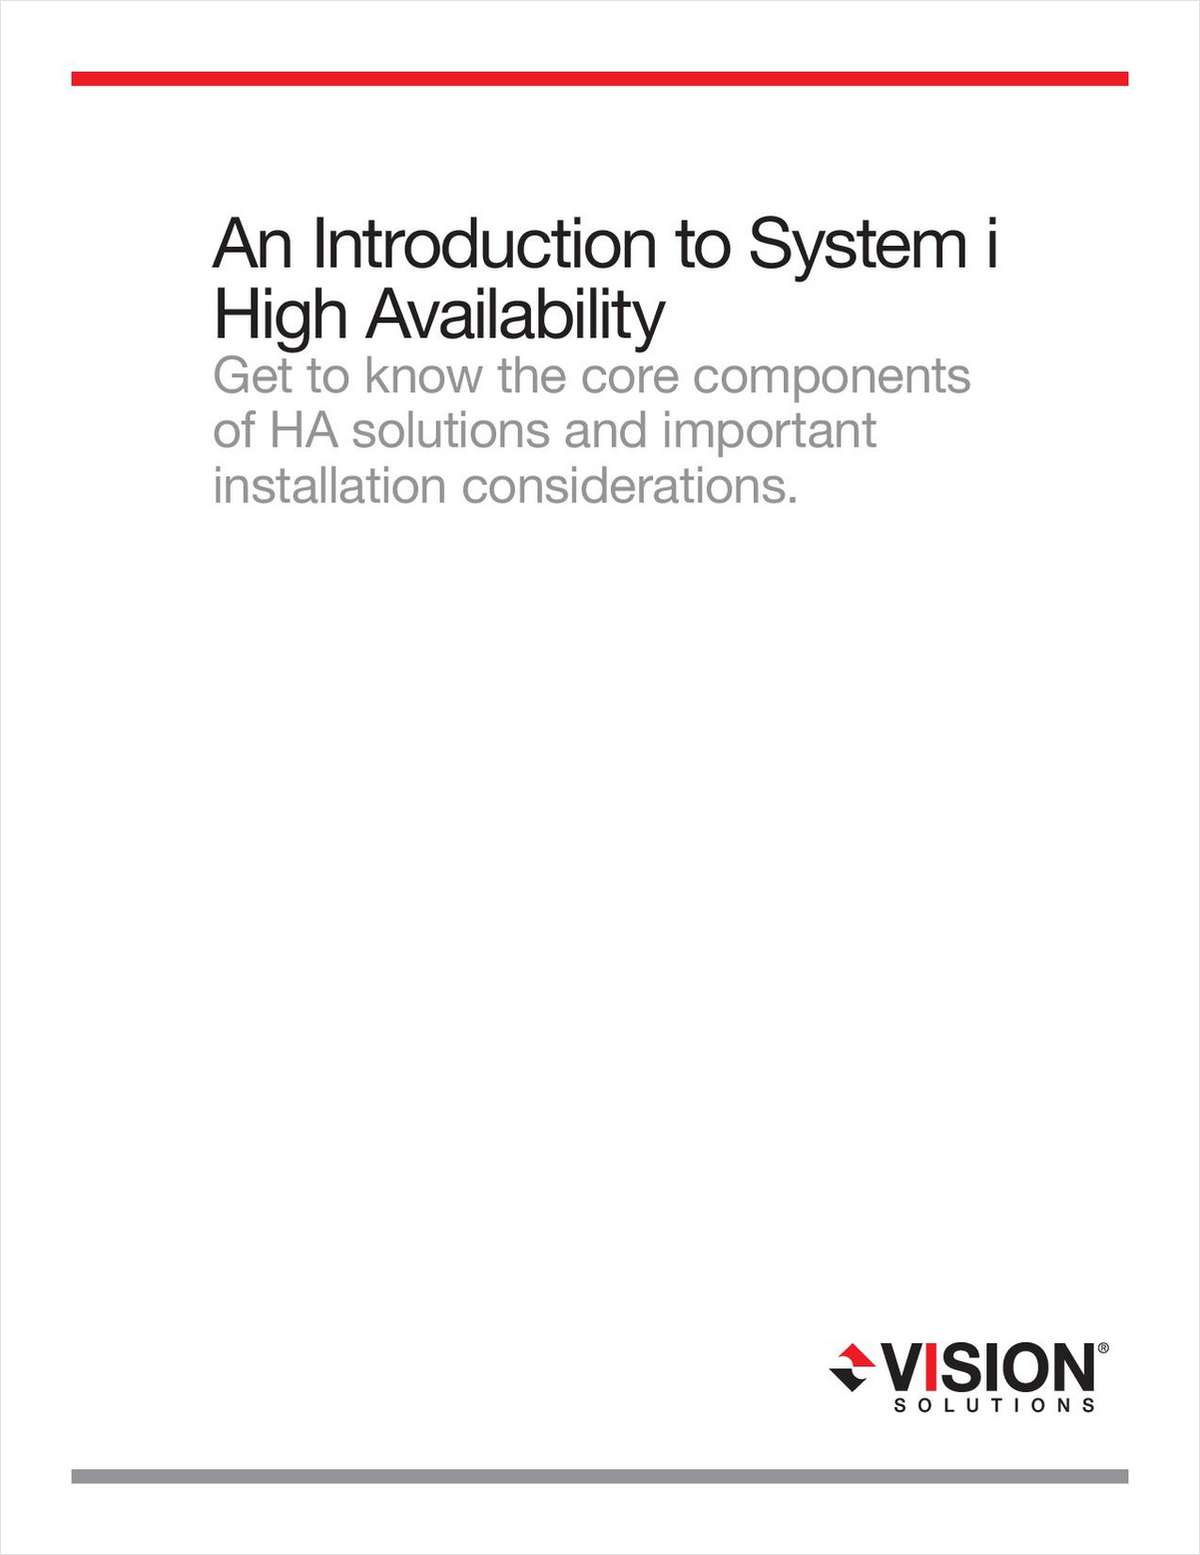 An Introduction to IBM System i (iSeries) High Availability Solutions